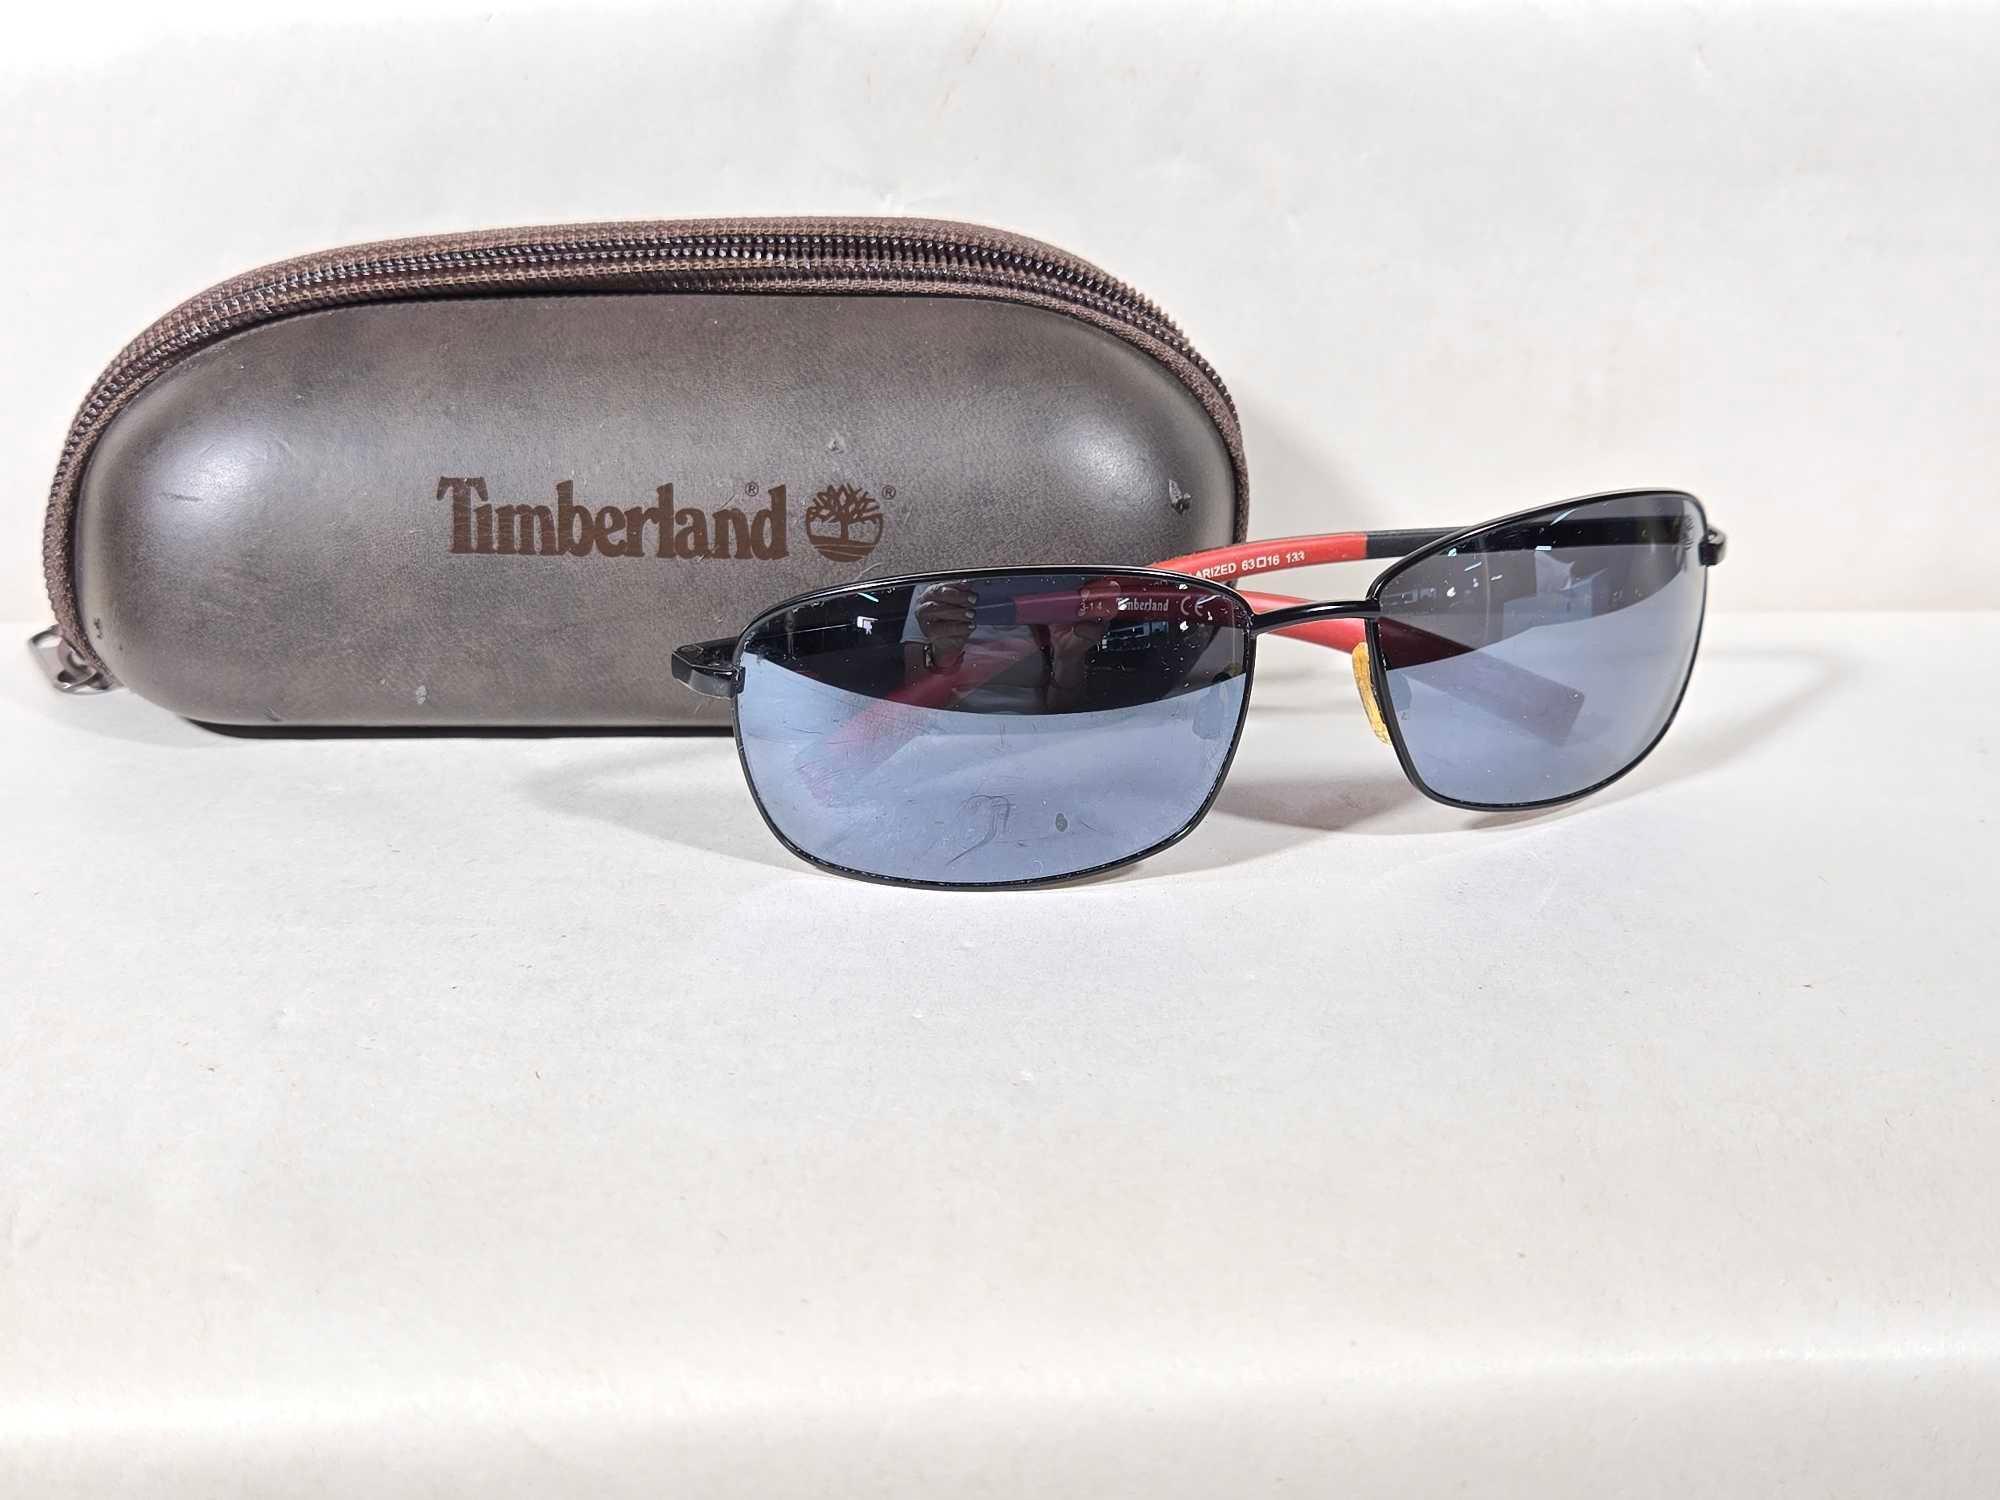 4 Pair of Pre-Owned Men's Sunglasses Incl. Oakley, Armani, & Timberland